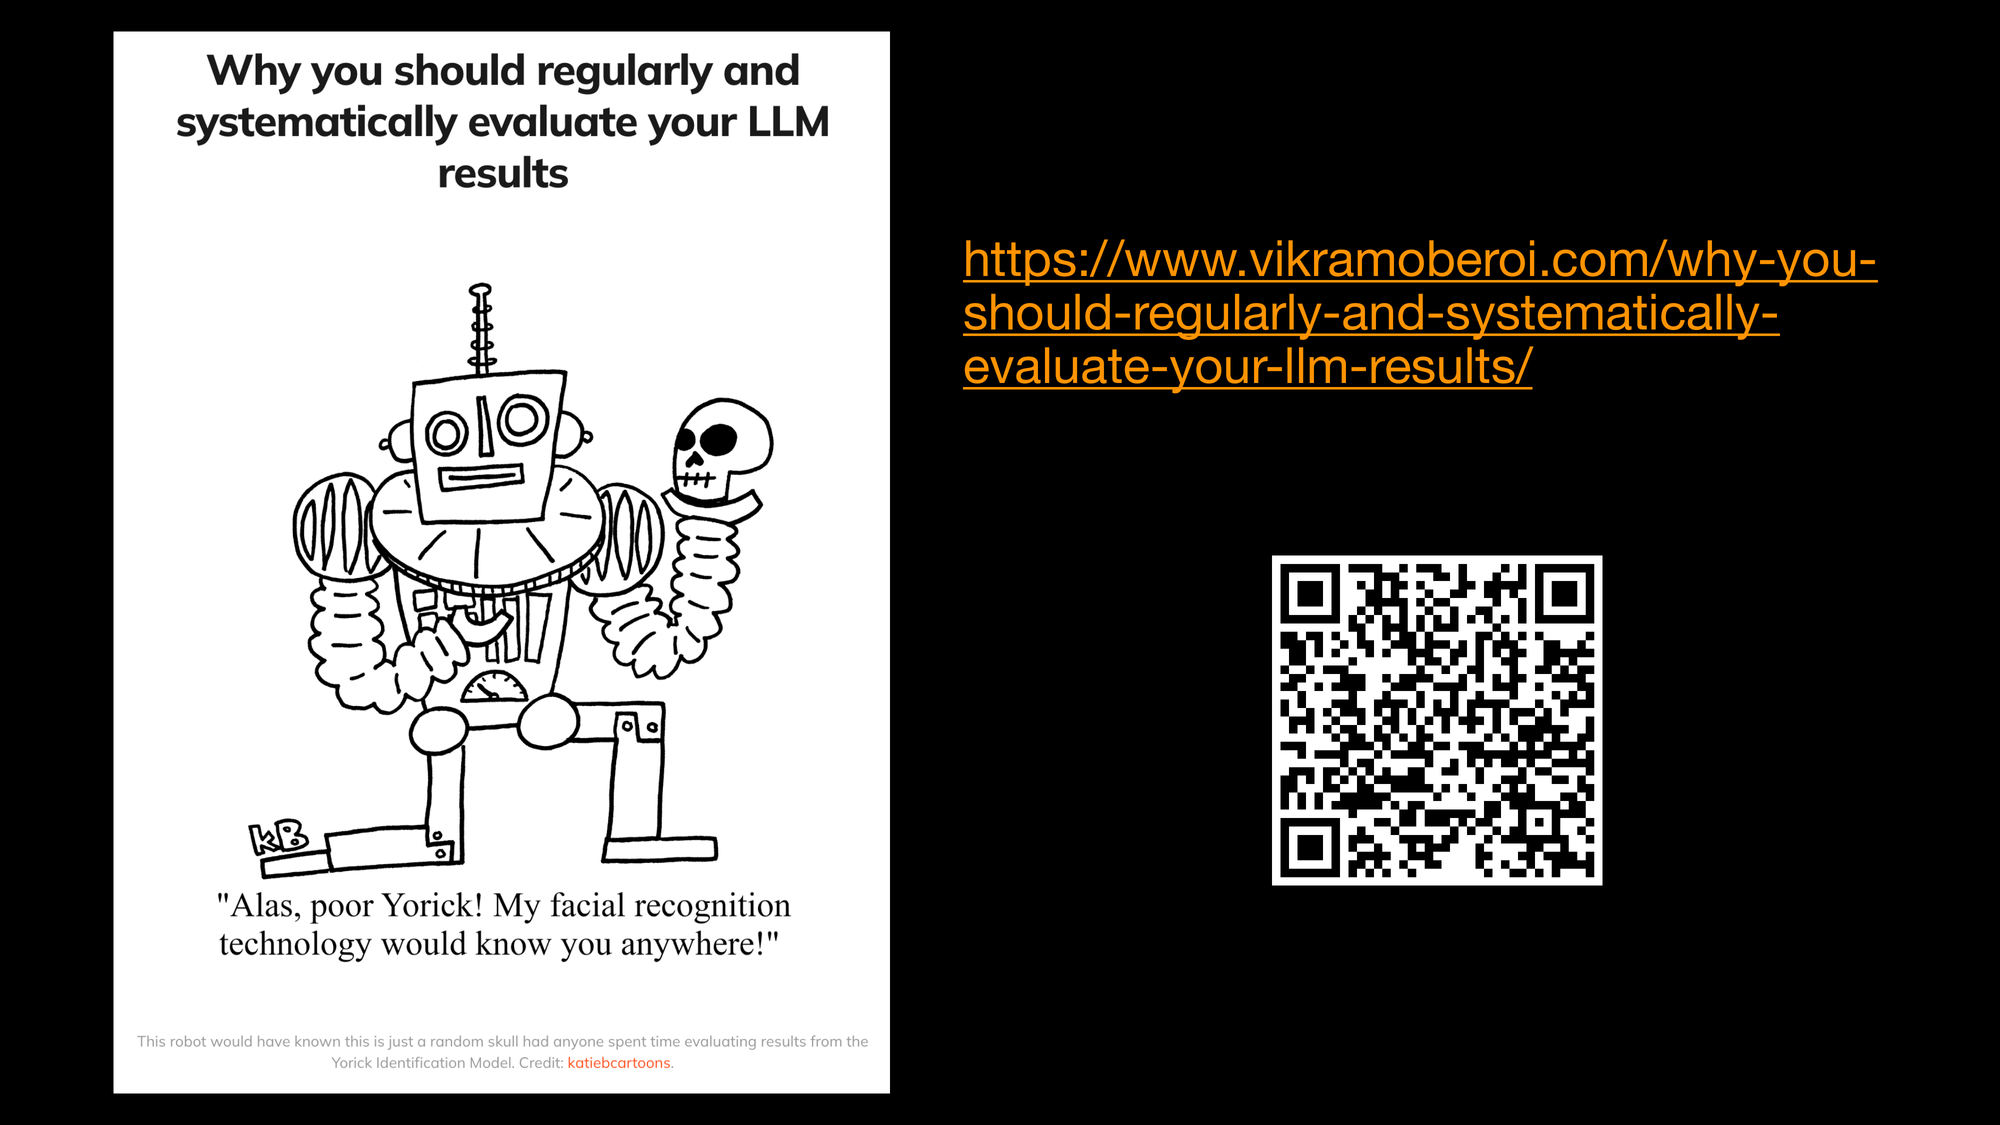 Why you should regularly and
systematically evaluate your LLM
results. There is a cartoon of a robot holding a skull. The robot looks like it is from Shakespearean times. He is saying: Alas, poor Yorick! My facial recognition technology would know you anywhere!